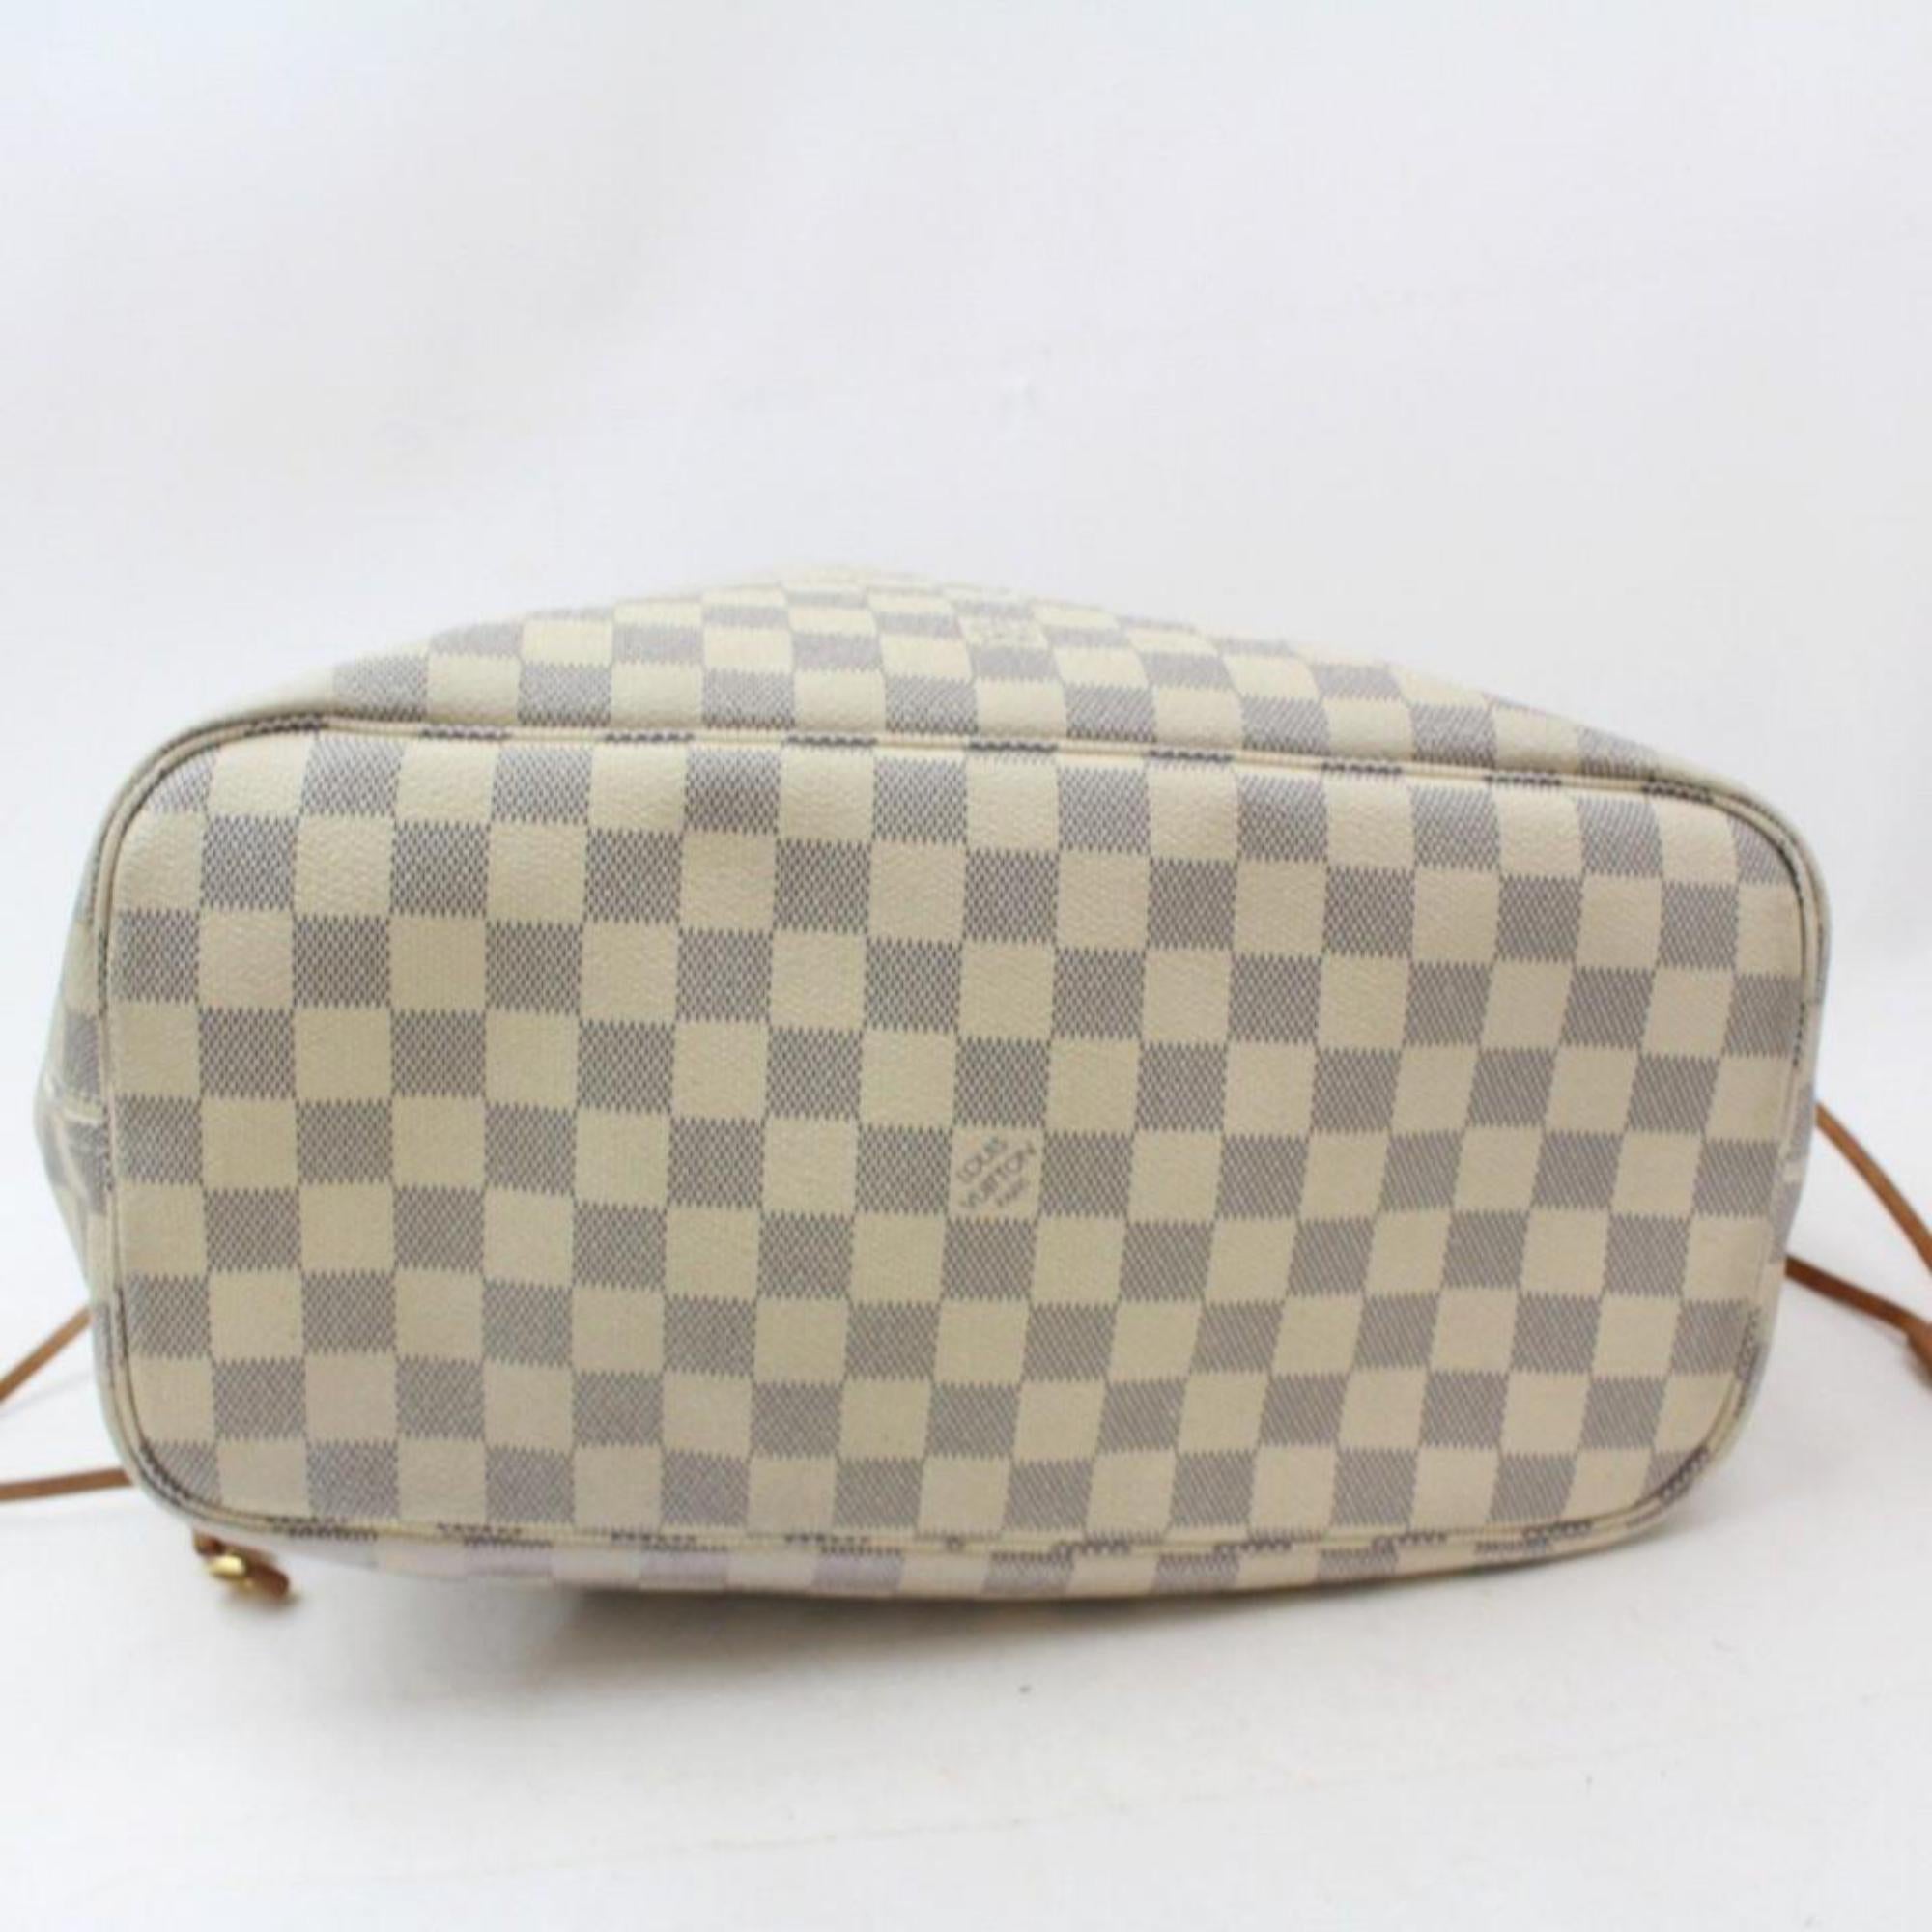 Louis Vuitton Neverfull Damier Azur Mm Everyday Shopper 868990 Canvas Tote For Sale 1